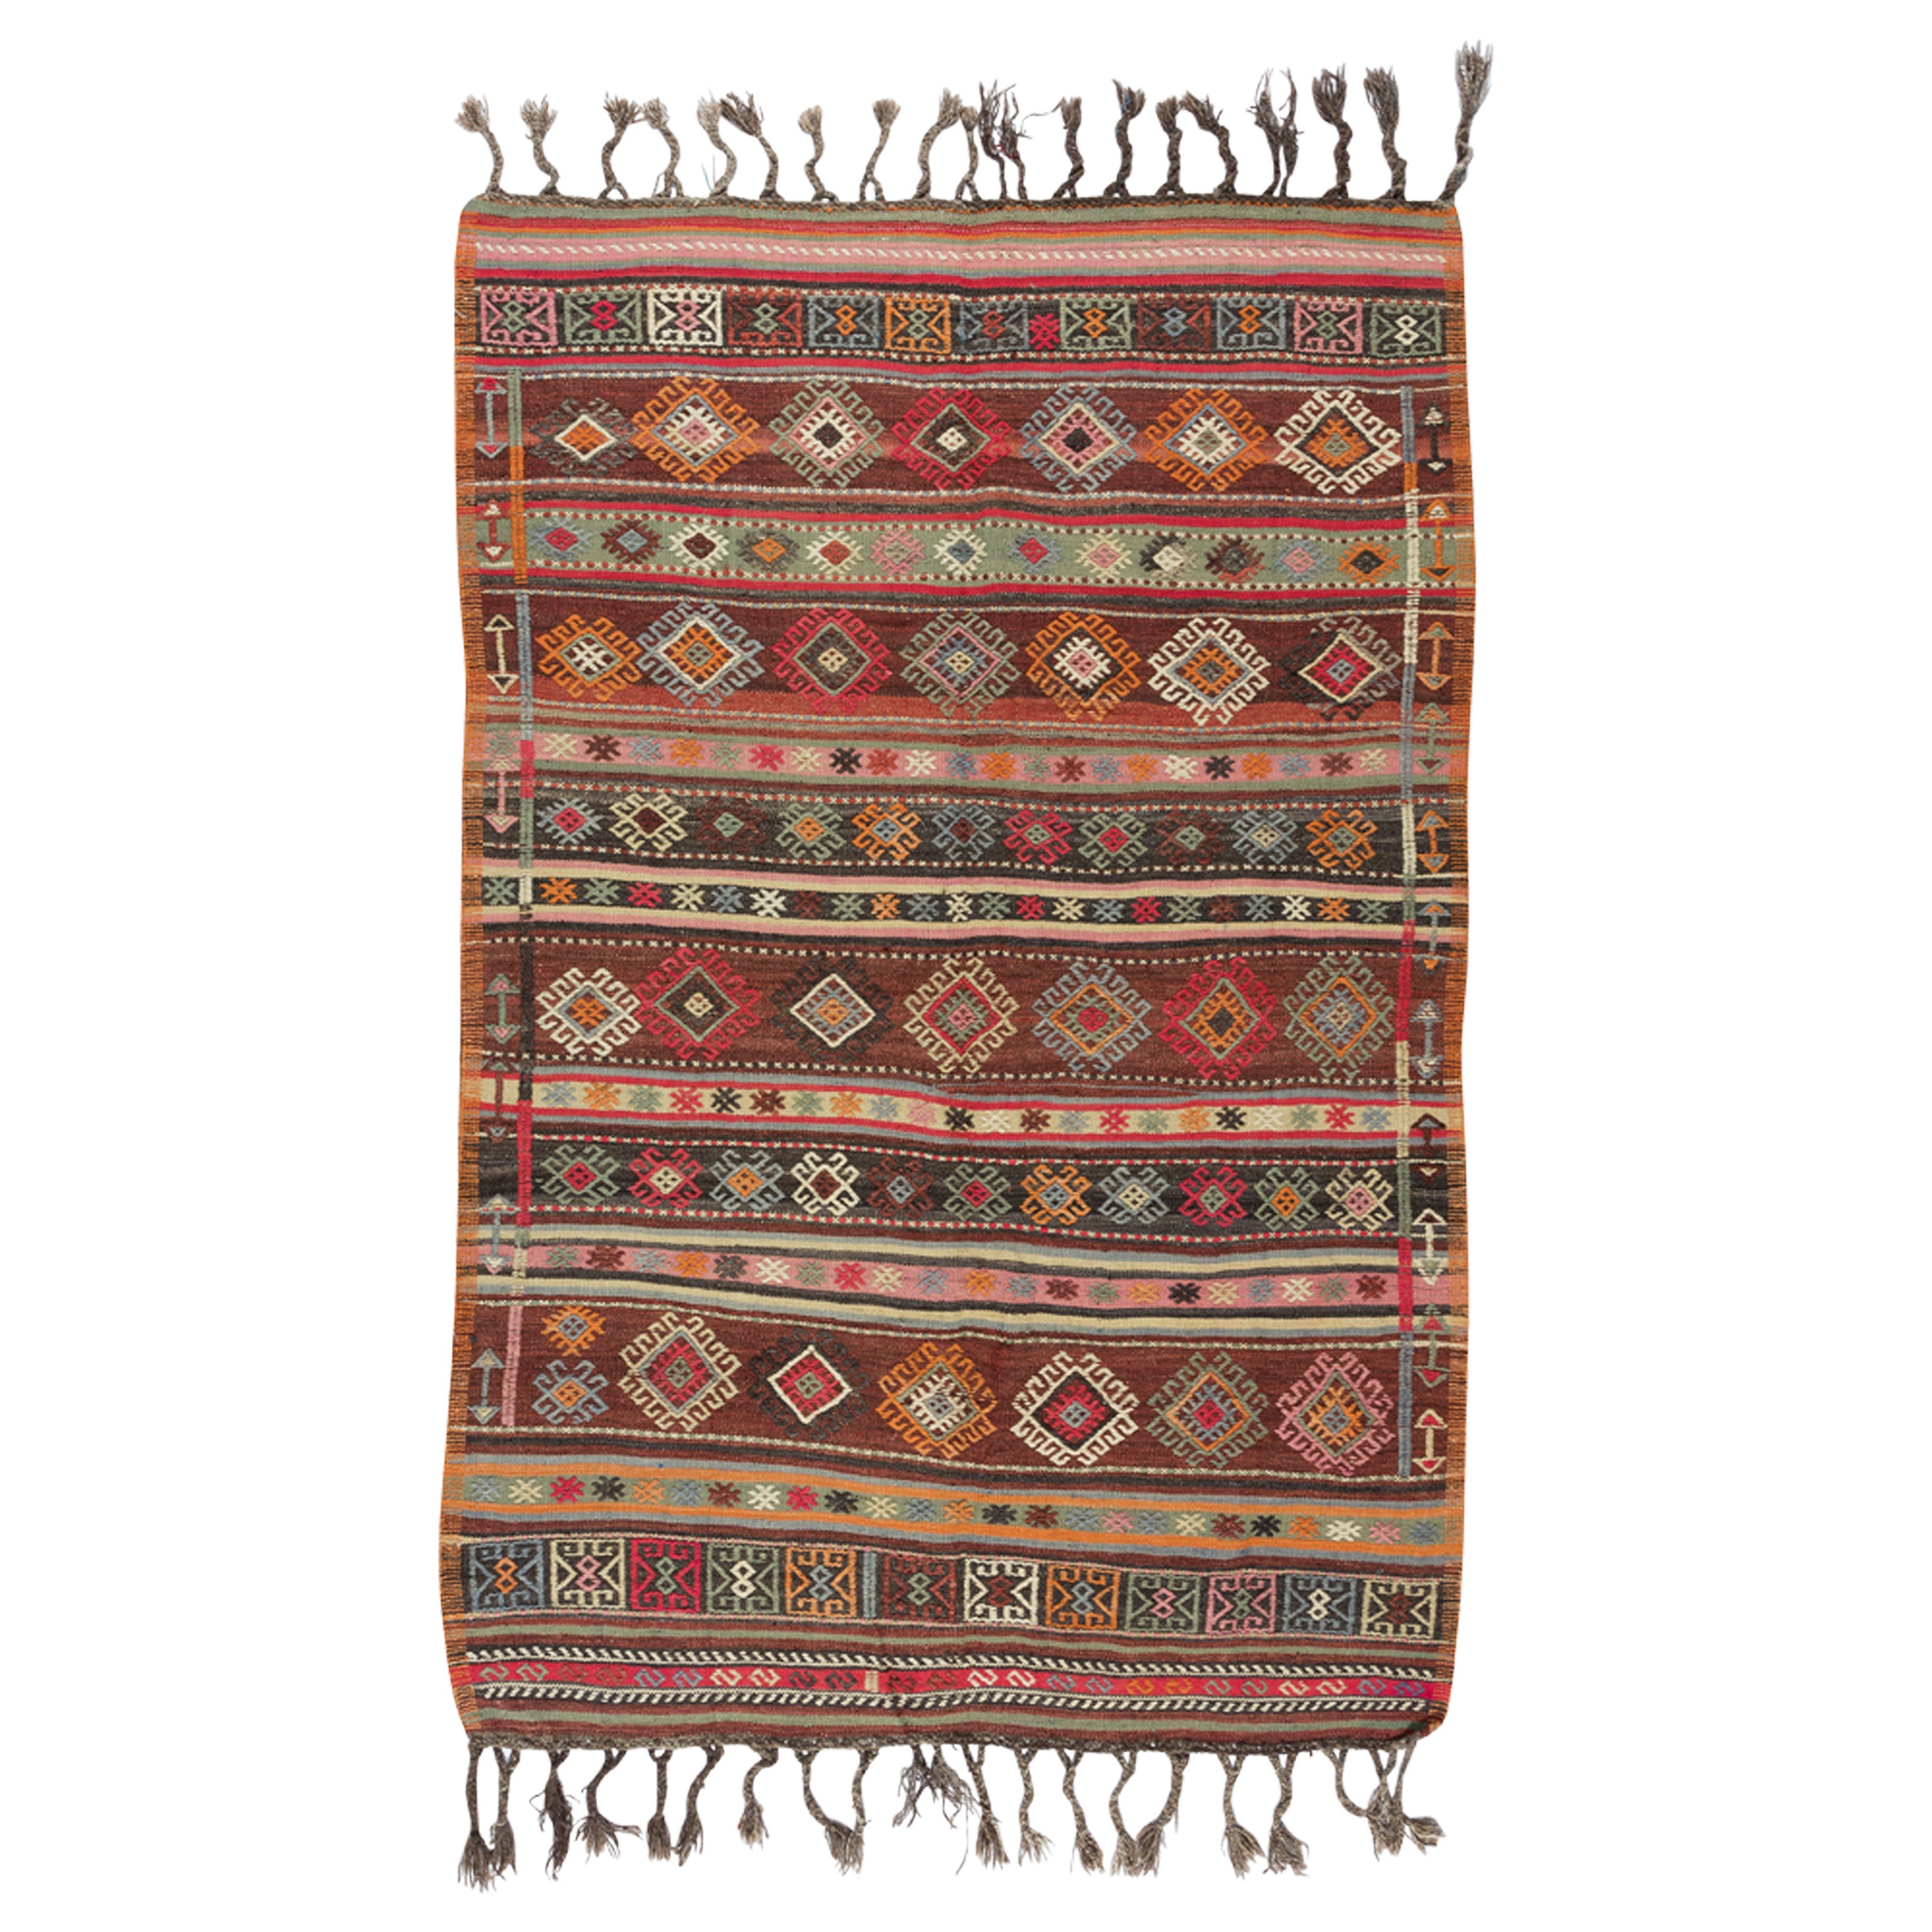 4.7x7 Ft Colorful Handmade Anatolian Kilim with Cabin Style, Flat Weave Wool Rug For Sale